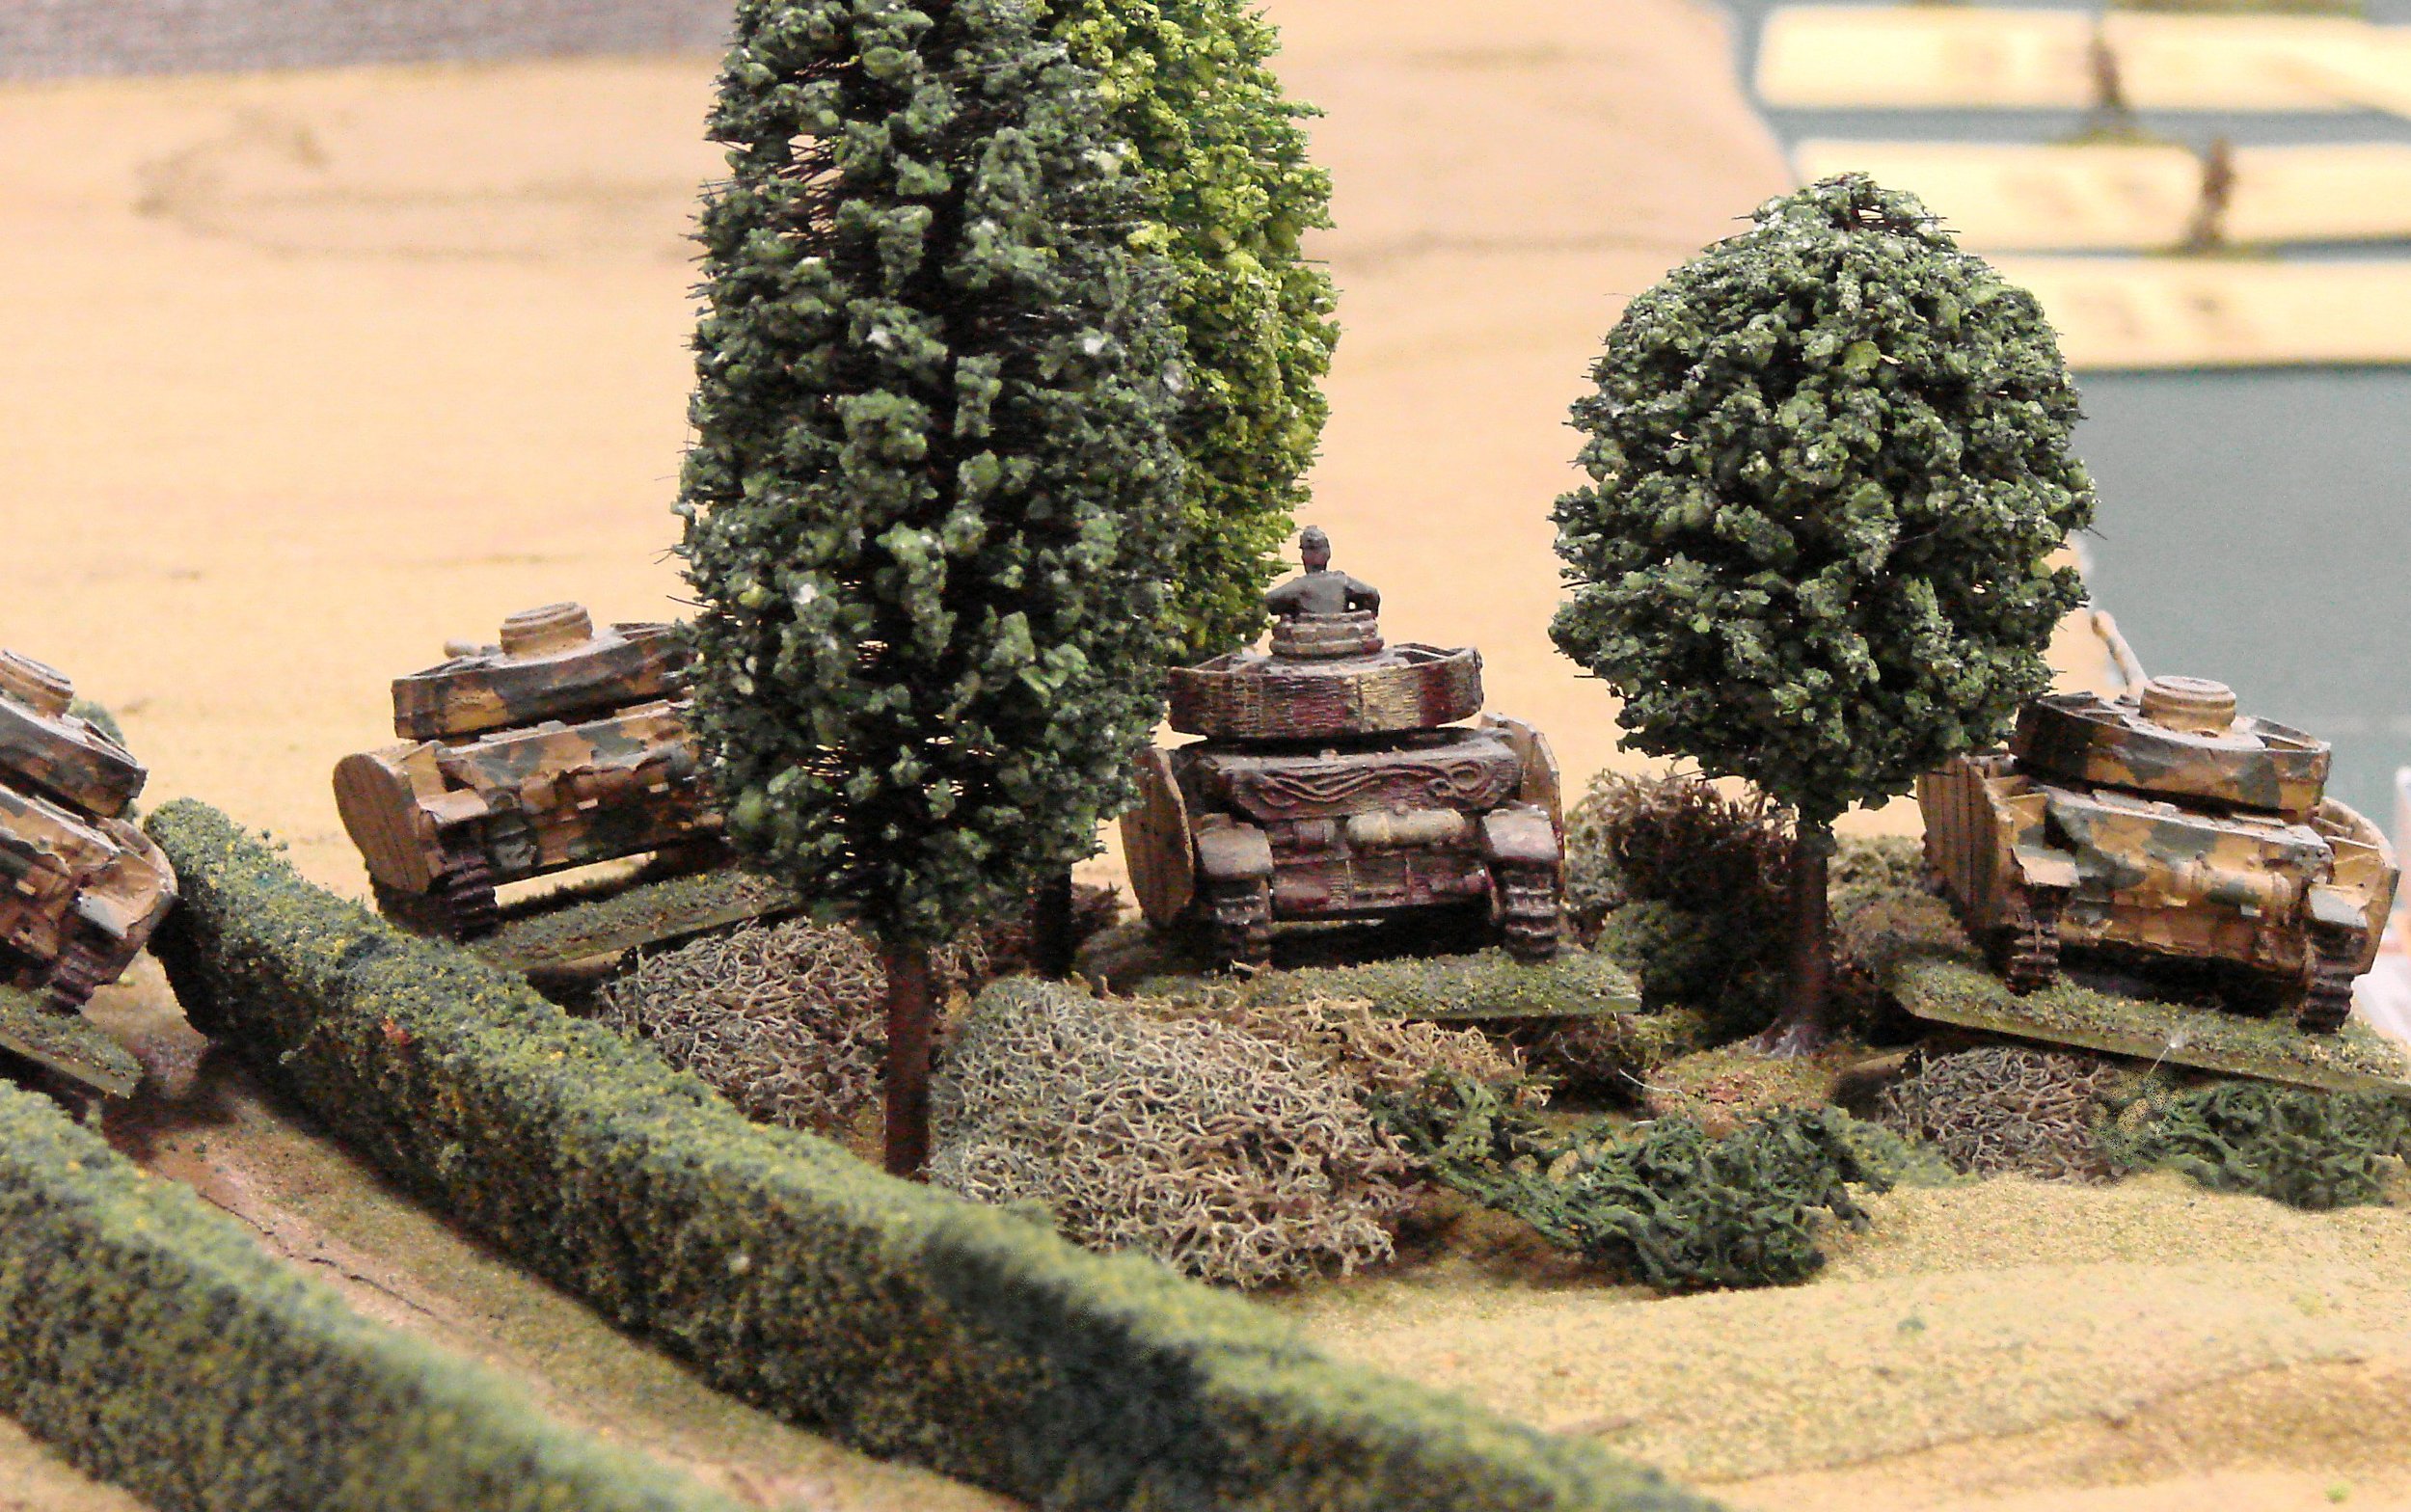 The remaining three Panzers scramble into the woods, bypassing the disabled tank.